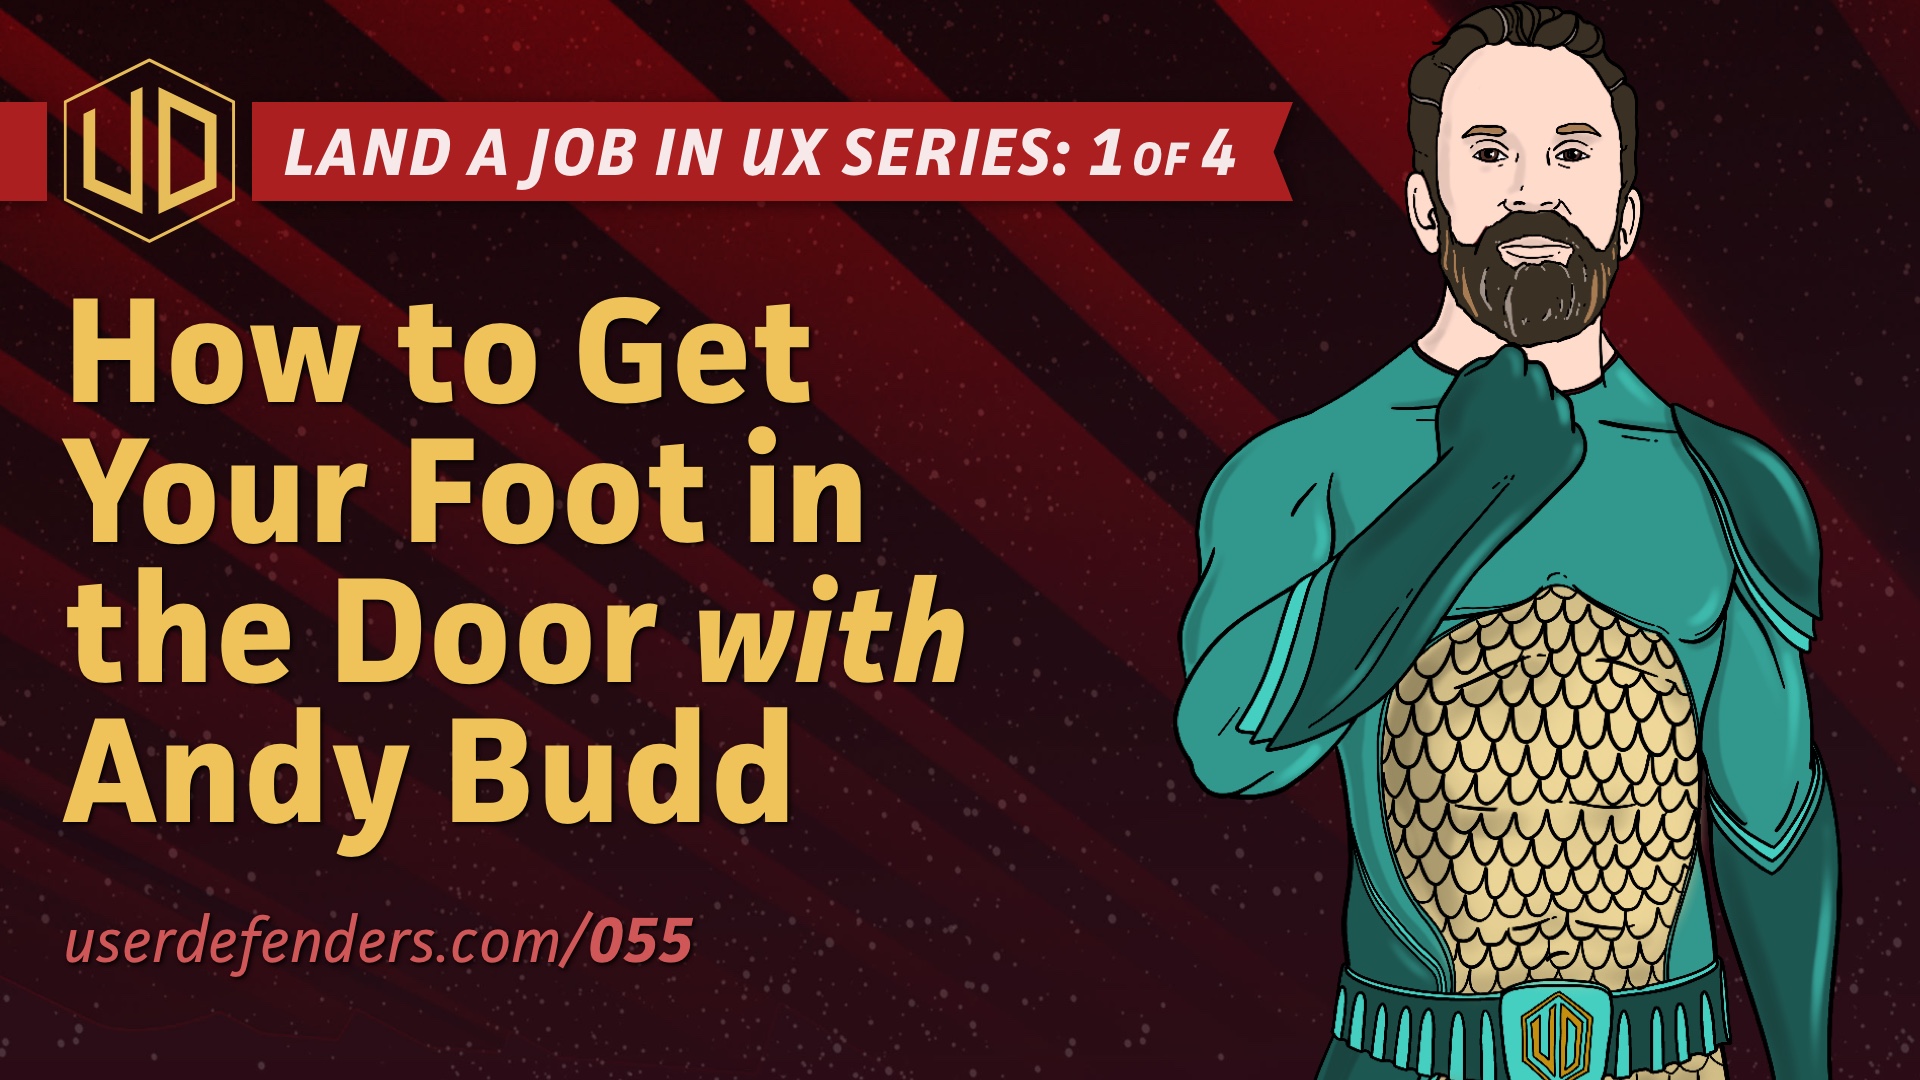 Land a Job in UX Series: User Defenders: Podcast with Andy Budd on How to Get Your Foot in the Door